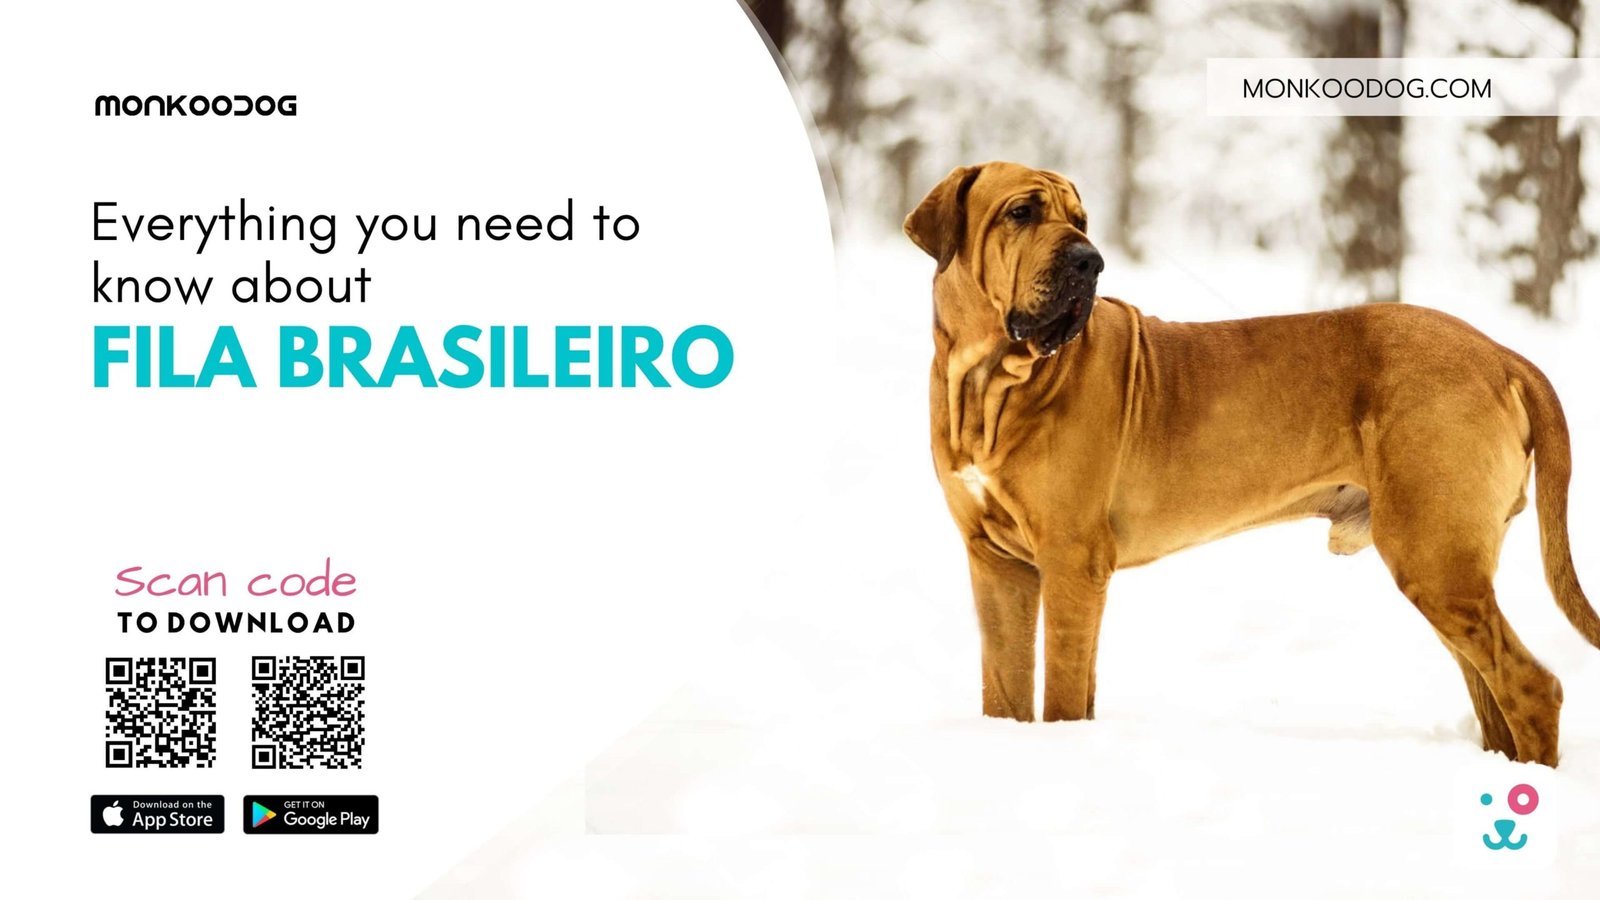 FILA BRASILEIRO OWNERS GUIDE: The Informative Guide On Everything